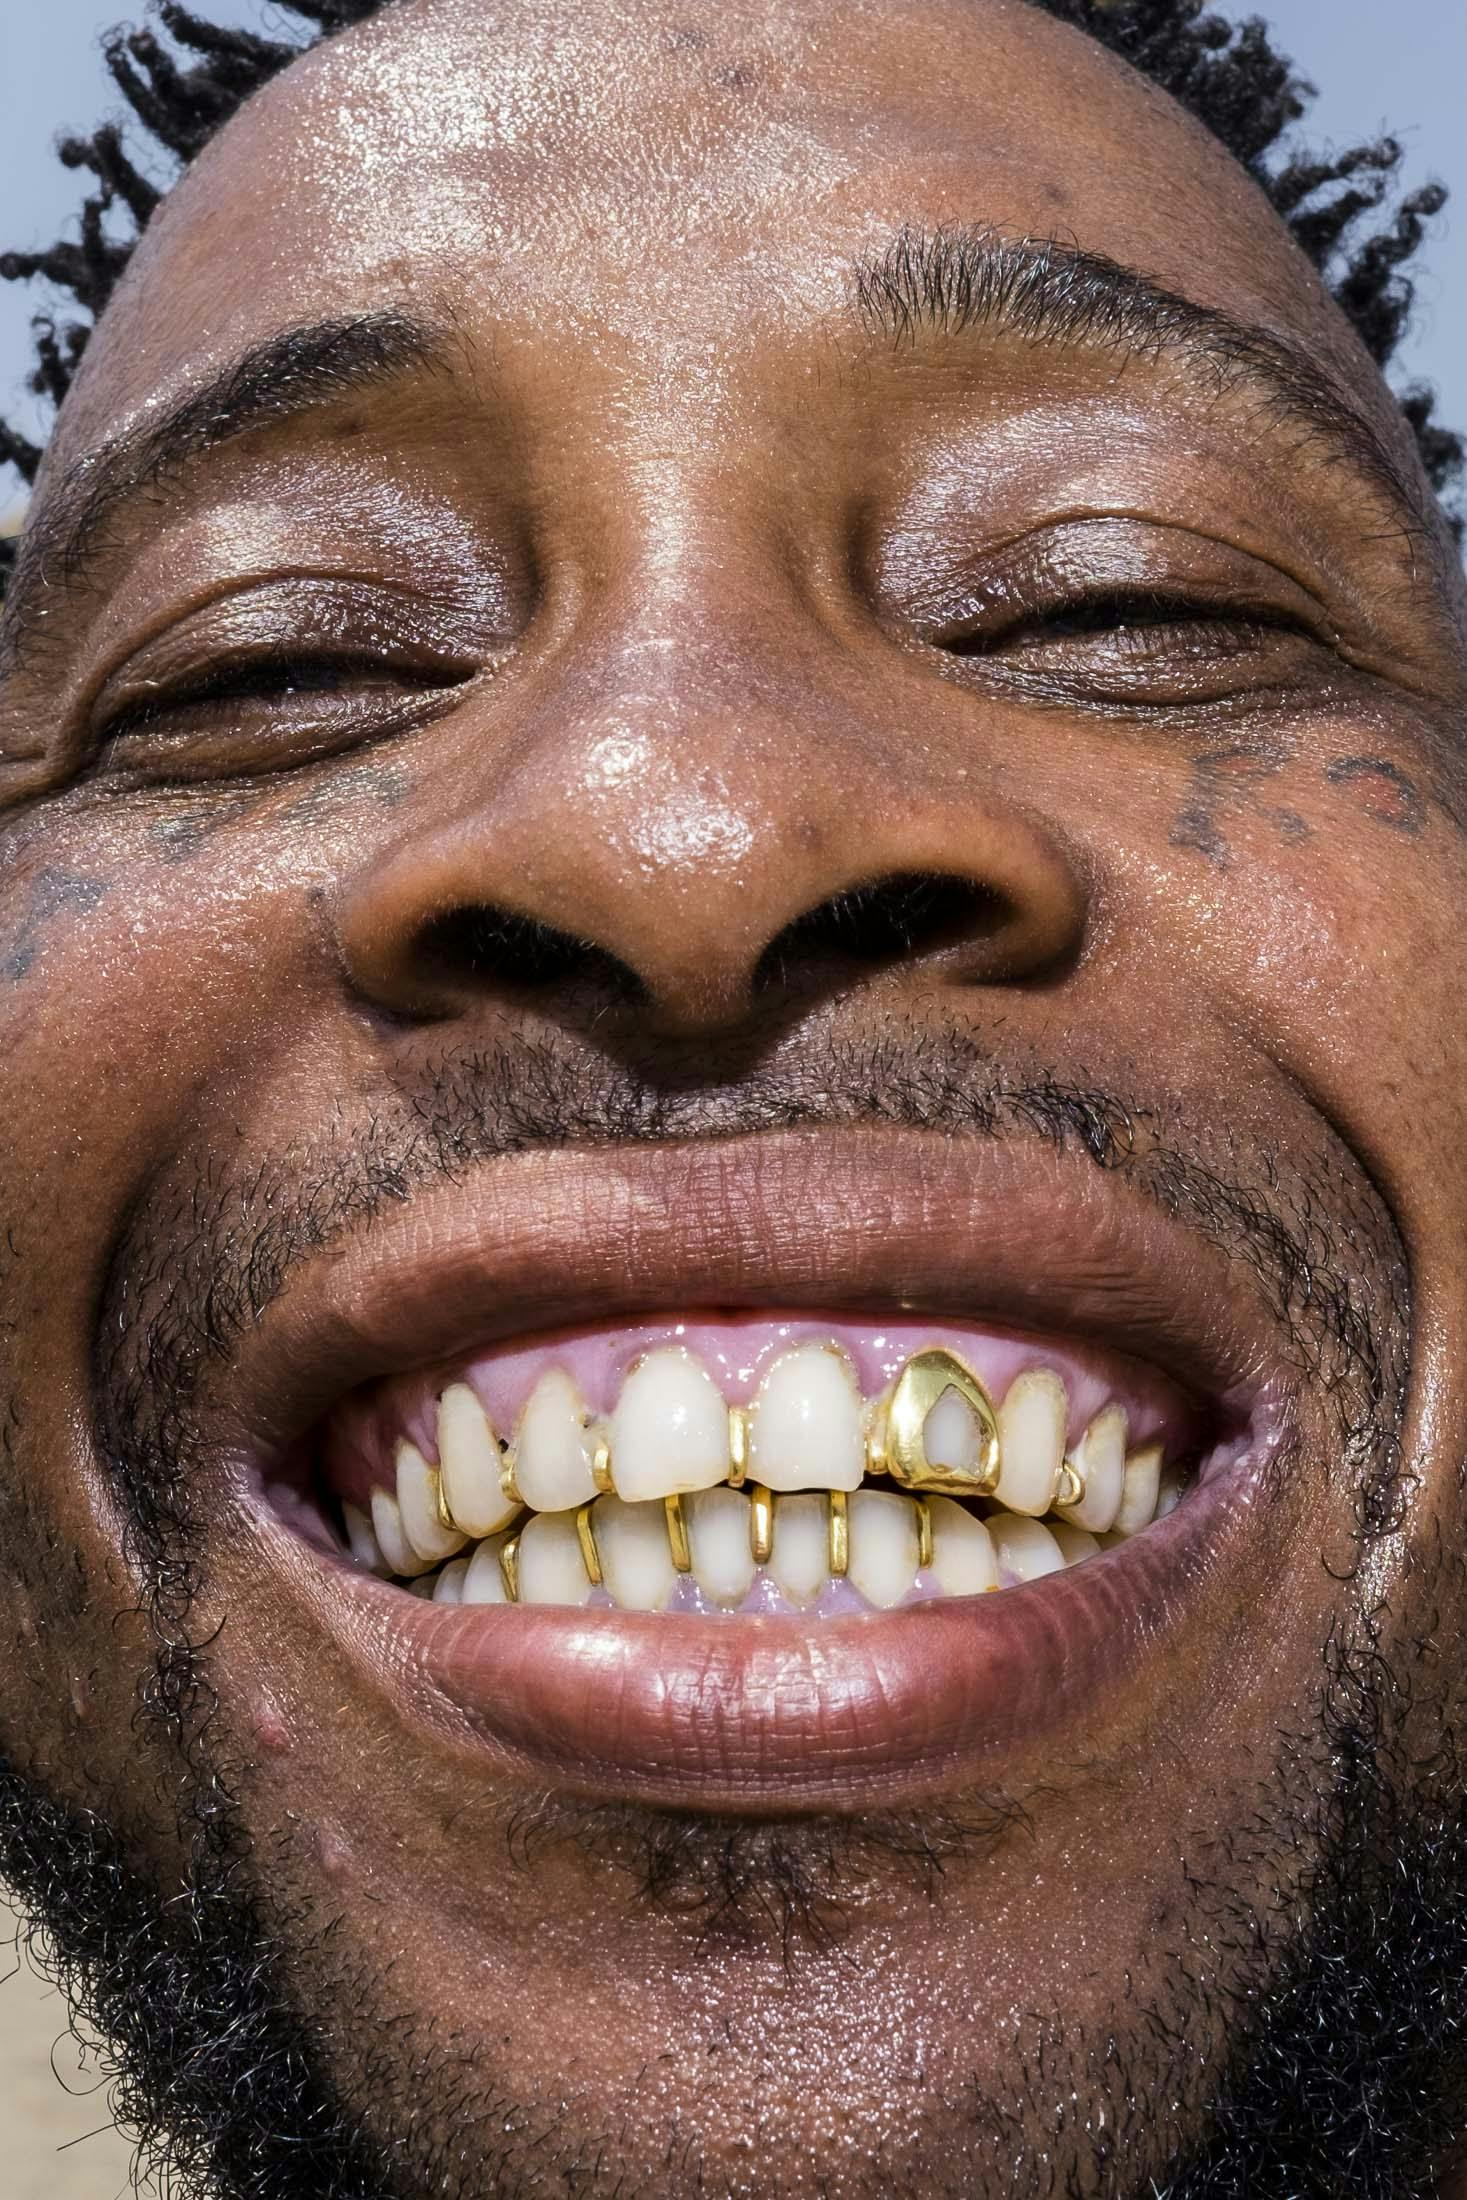 Papa row smiling with gold teeth